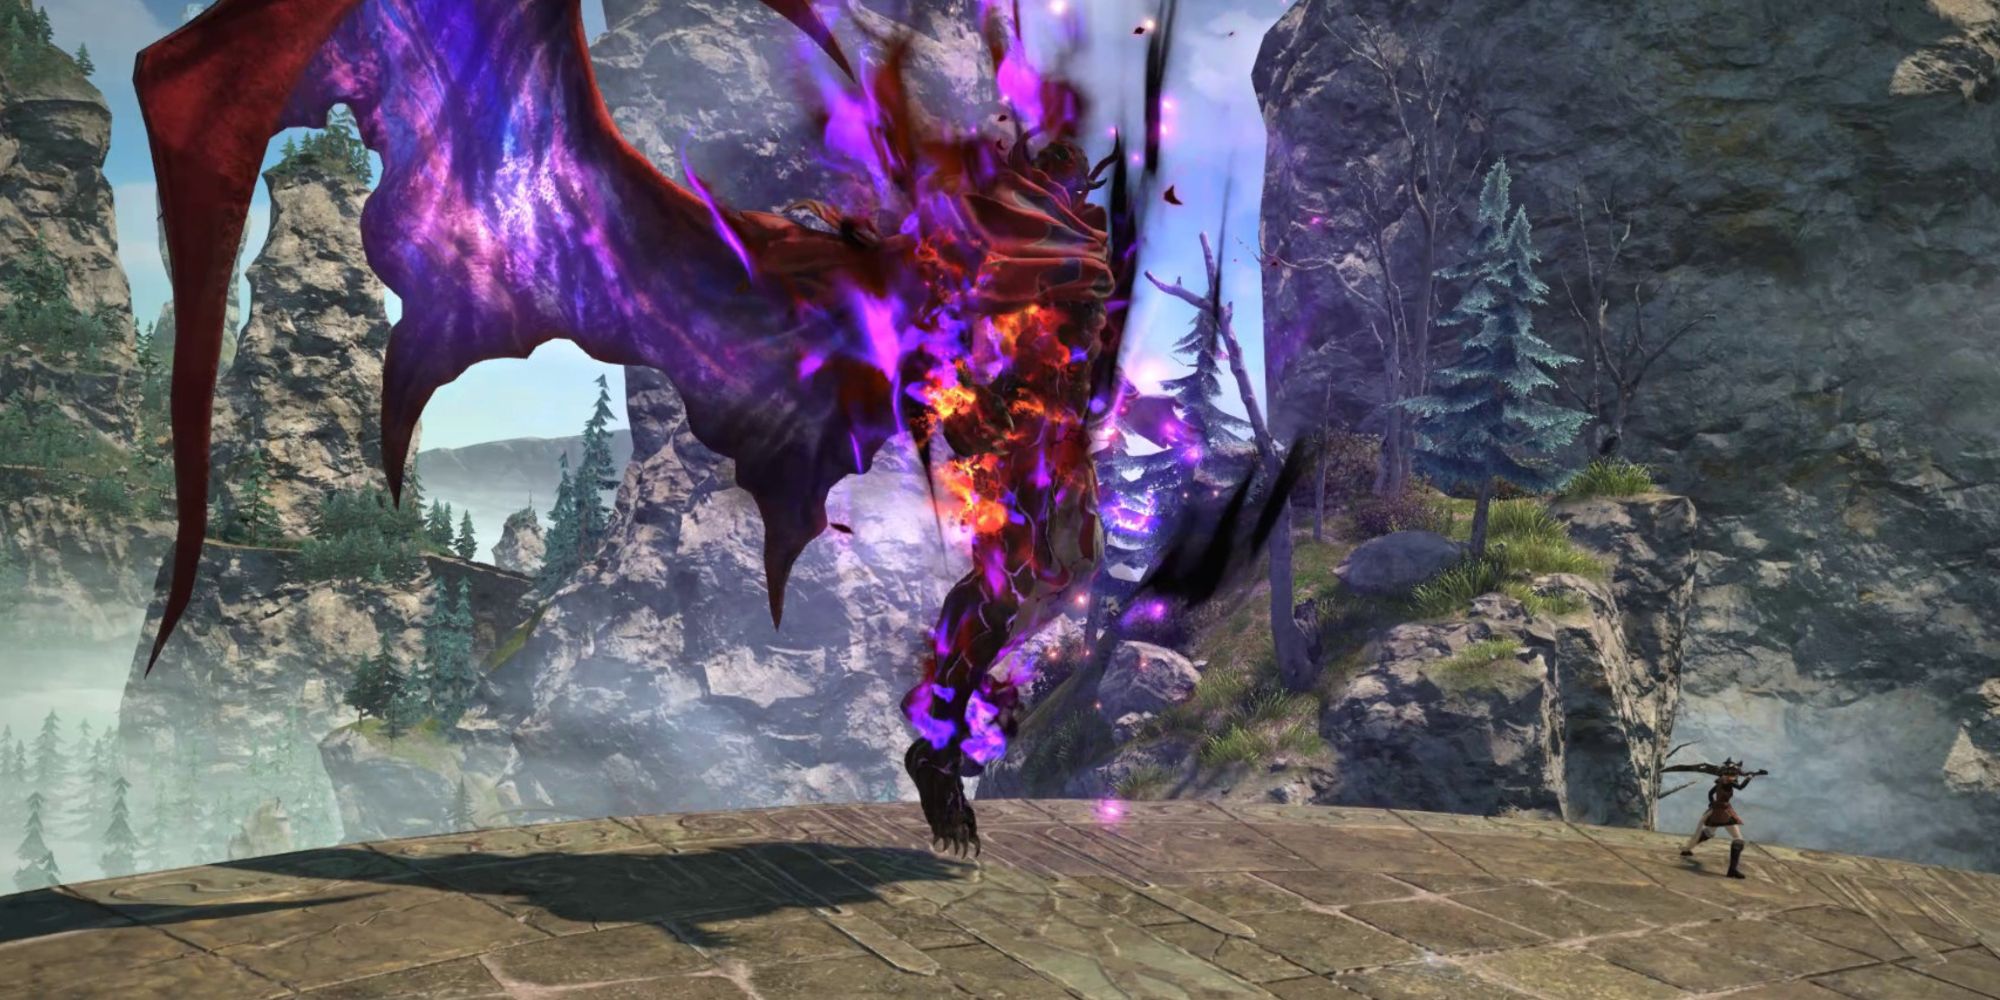 The third phase of the Mount Ordeals Extreme Trial, having Rubicante sprout a single bat-like wing on the right side of his body, while emitting an ominous purple flame around himself in Final Fantasy 14